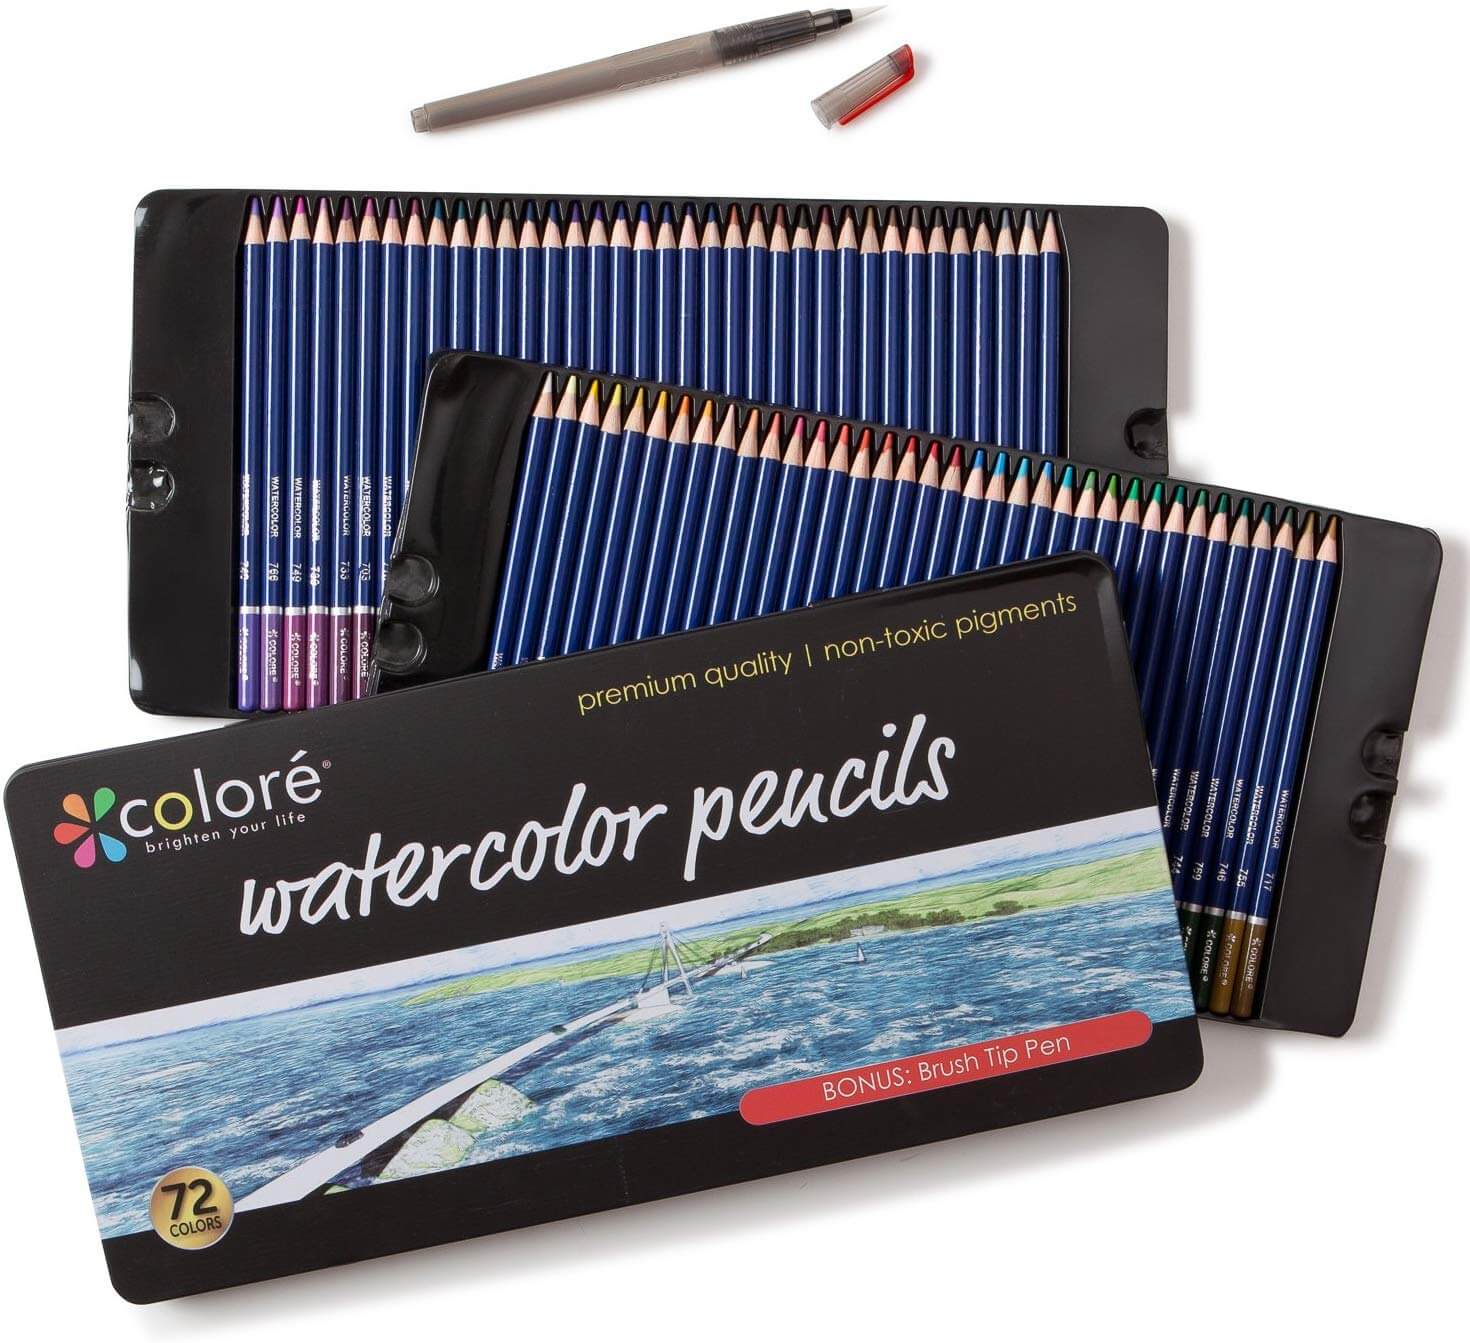 Colore Watercolor Pencils - Water Soluble Colored Pencils For Art Students & Professionals